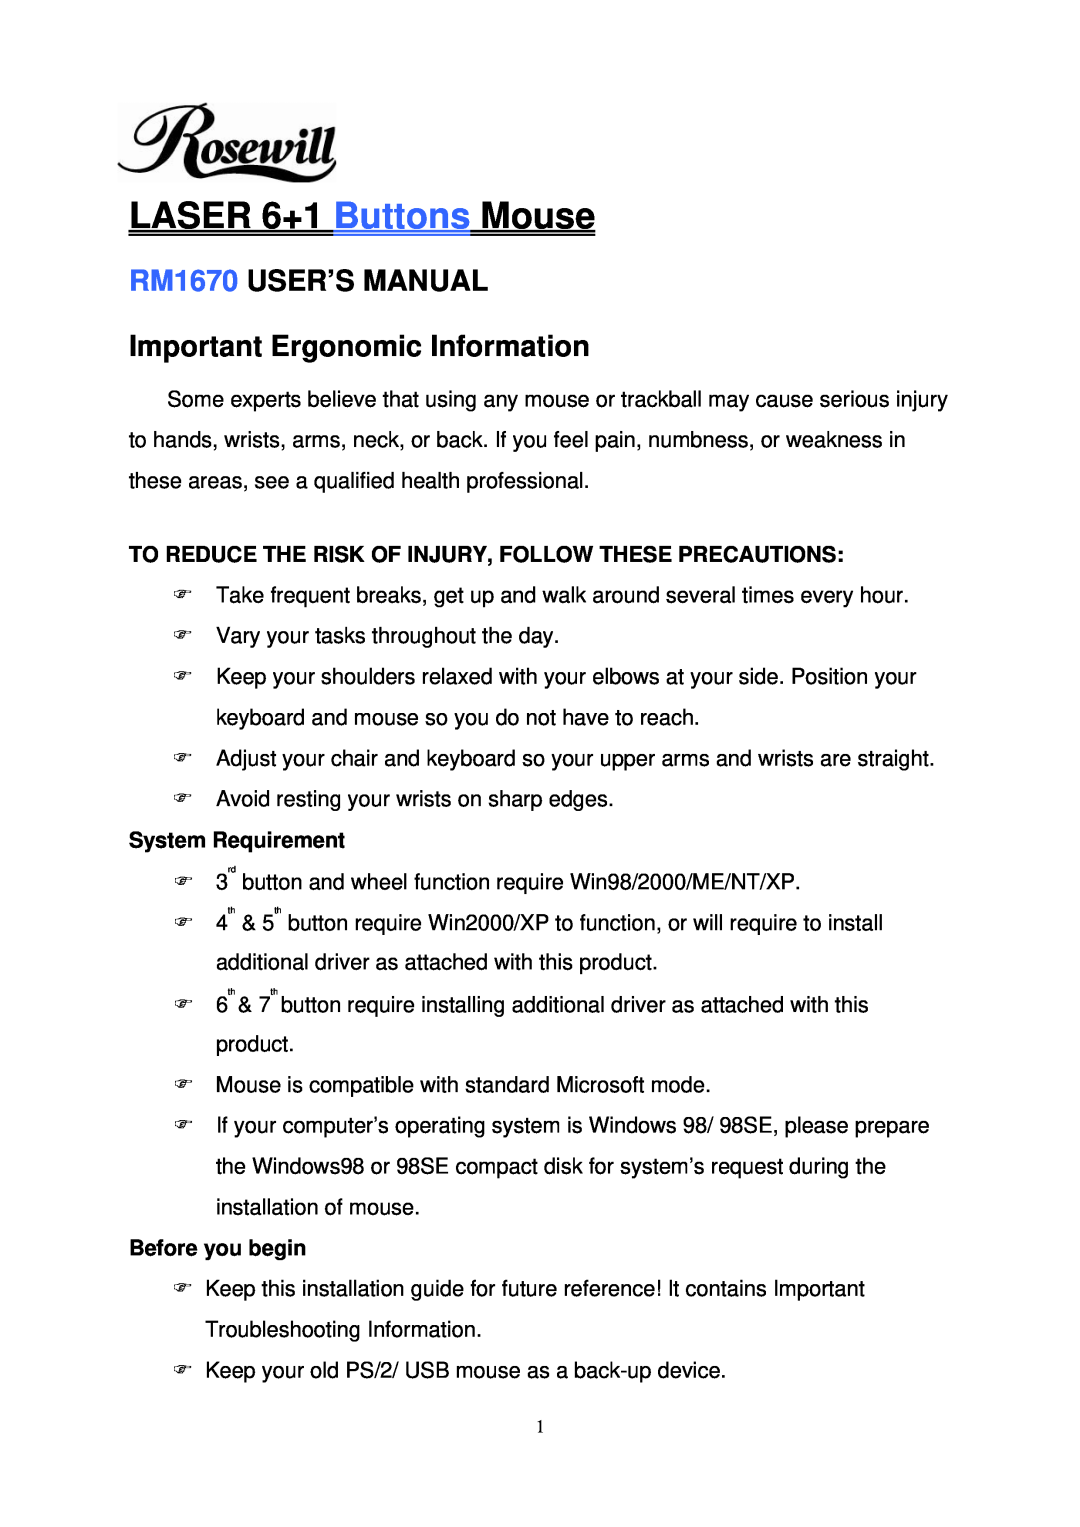 Rosewill user manual RM1670 USER’S MANUAL Important Ergonomic Information, System Requirement, Before you begin 